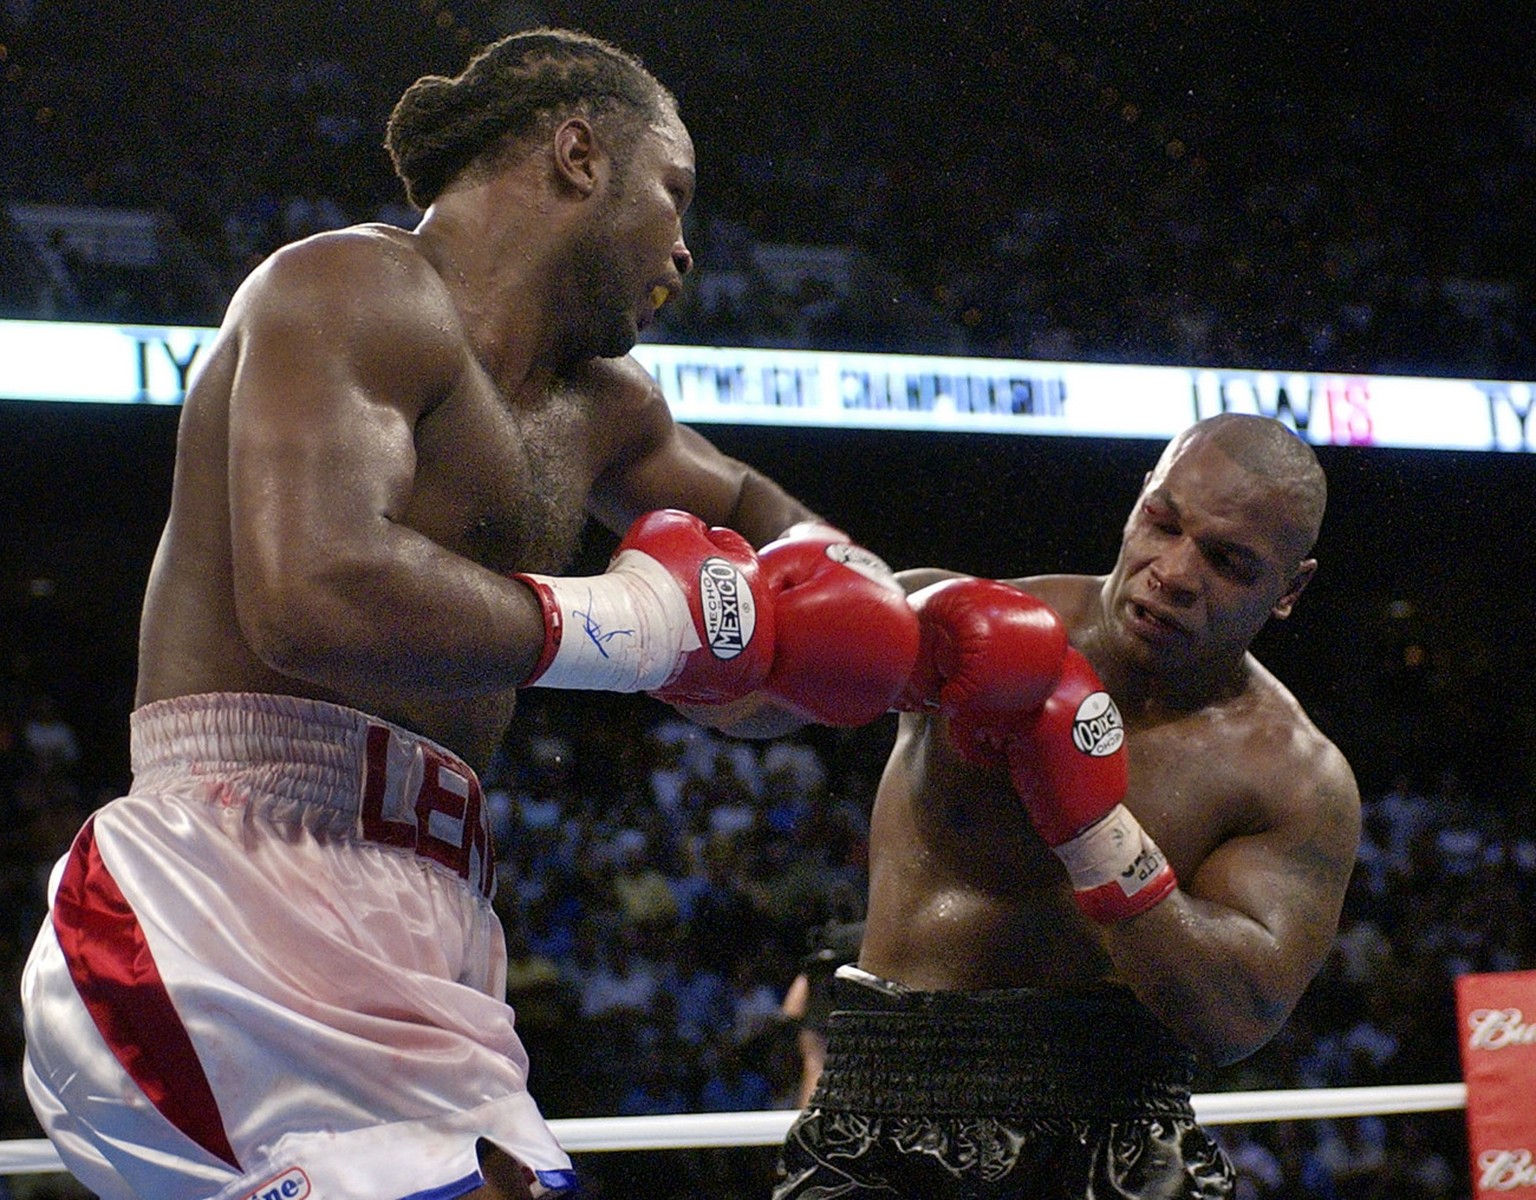 Lennox Lewis, left, goes after challenger Mike Tyson in the 8th round of their WBC/IBF heavyweight championship bout at The Pyramid in Memphis, Tenn., Saturday, June 8, 2002. Lewis was declared the wi ...